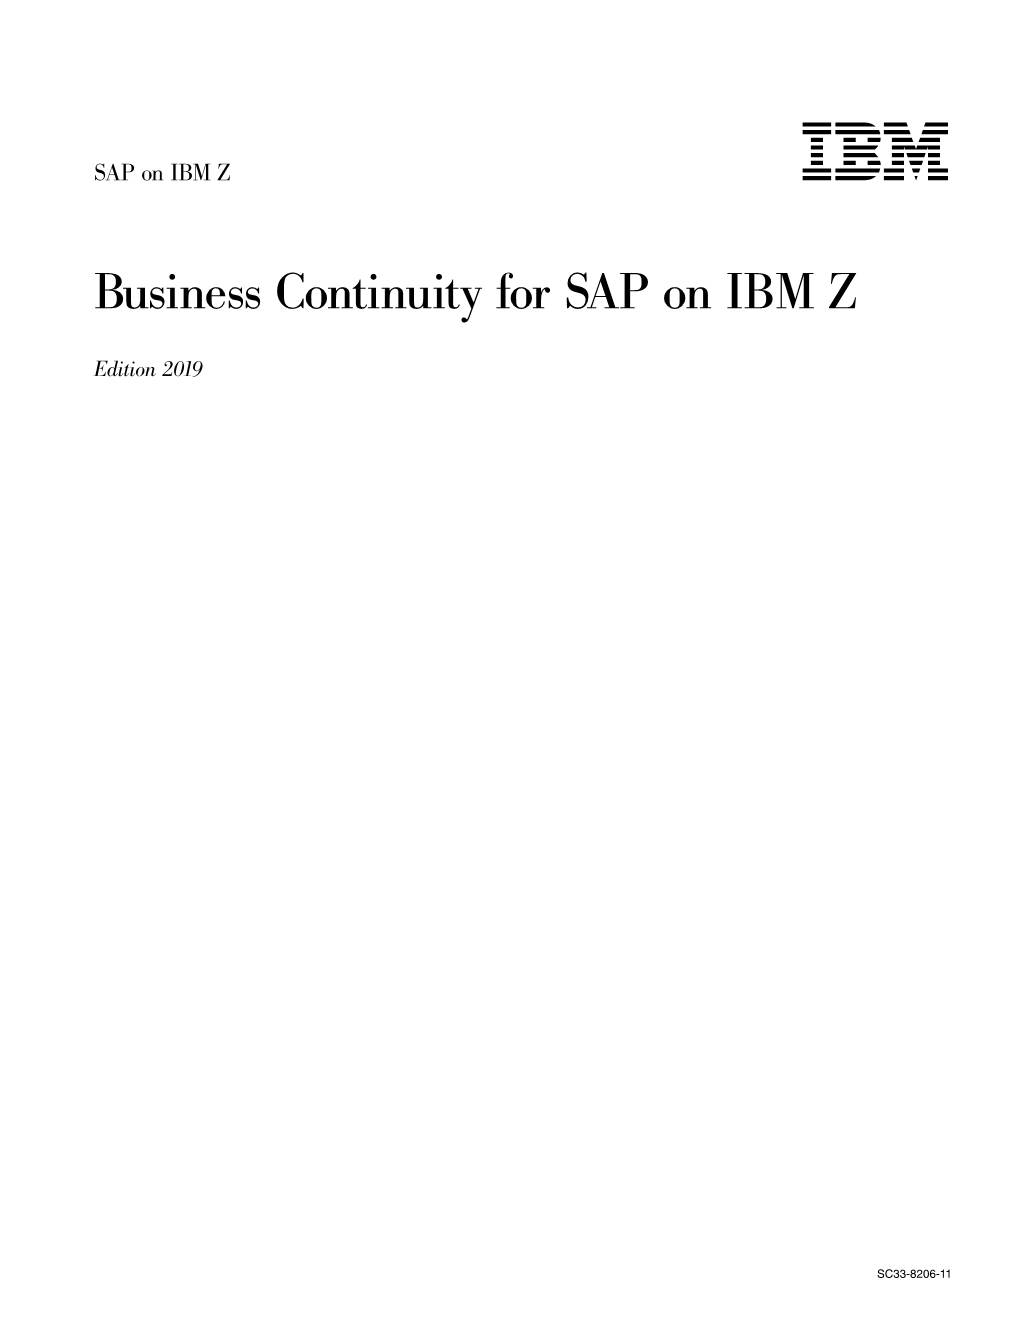 Business Continuity for SAP on IBM Z